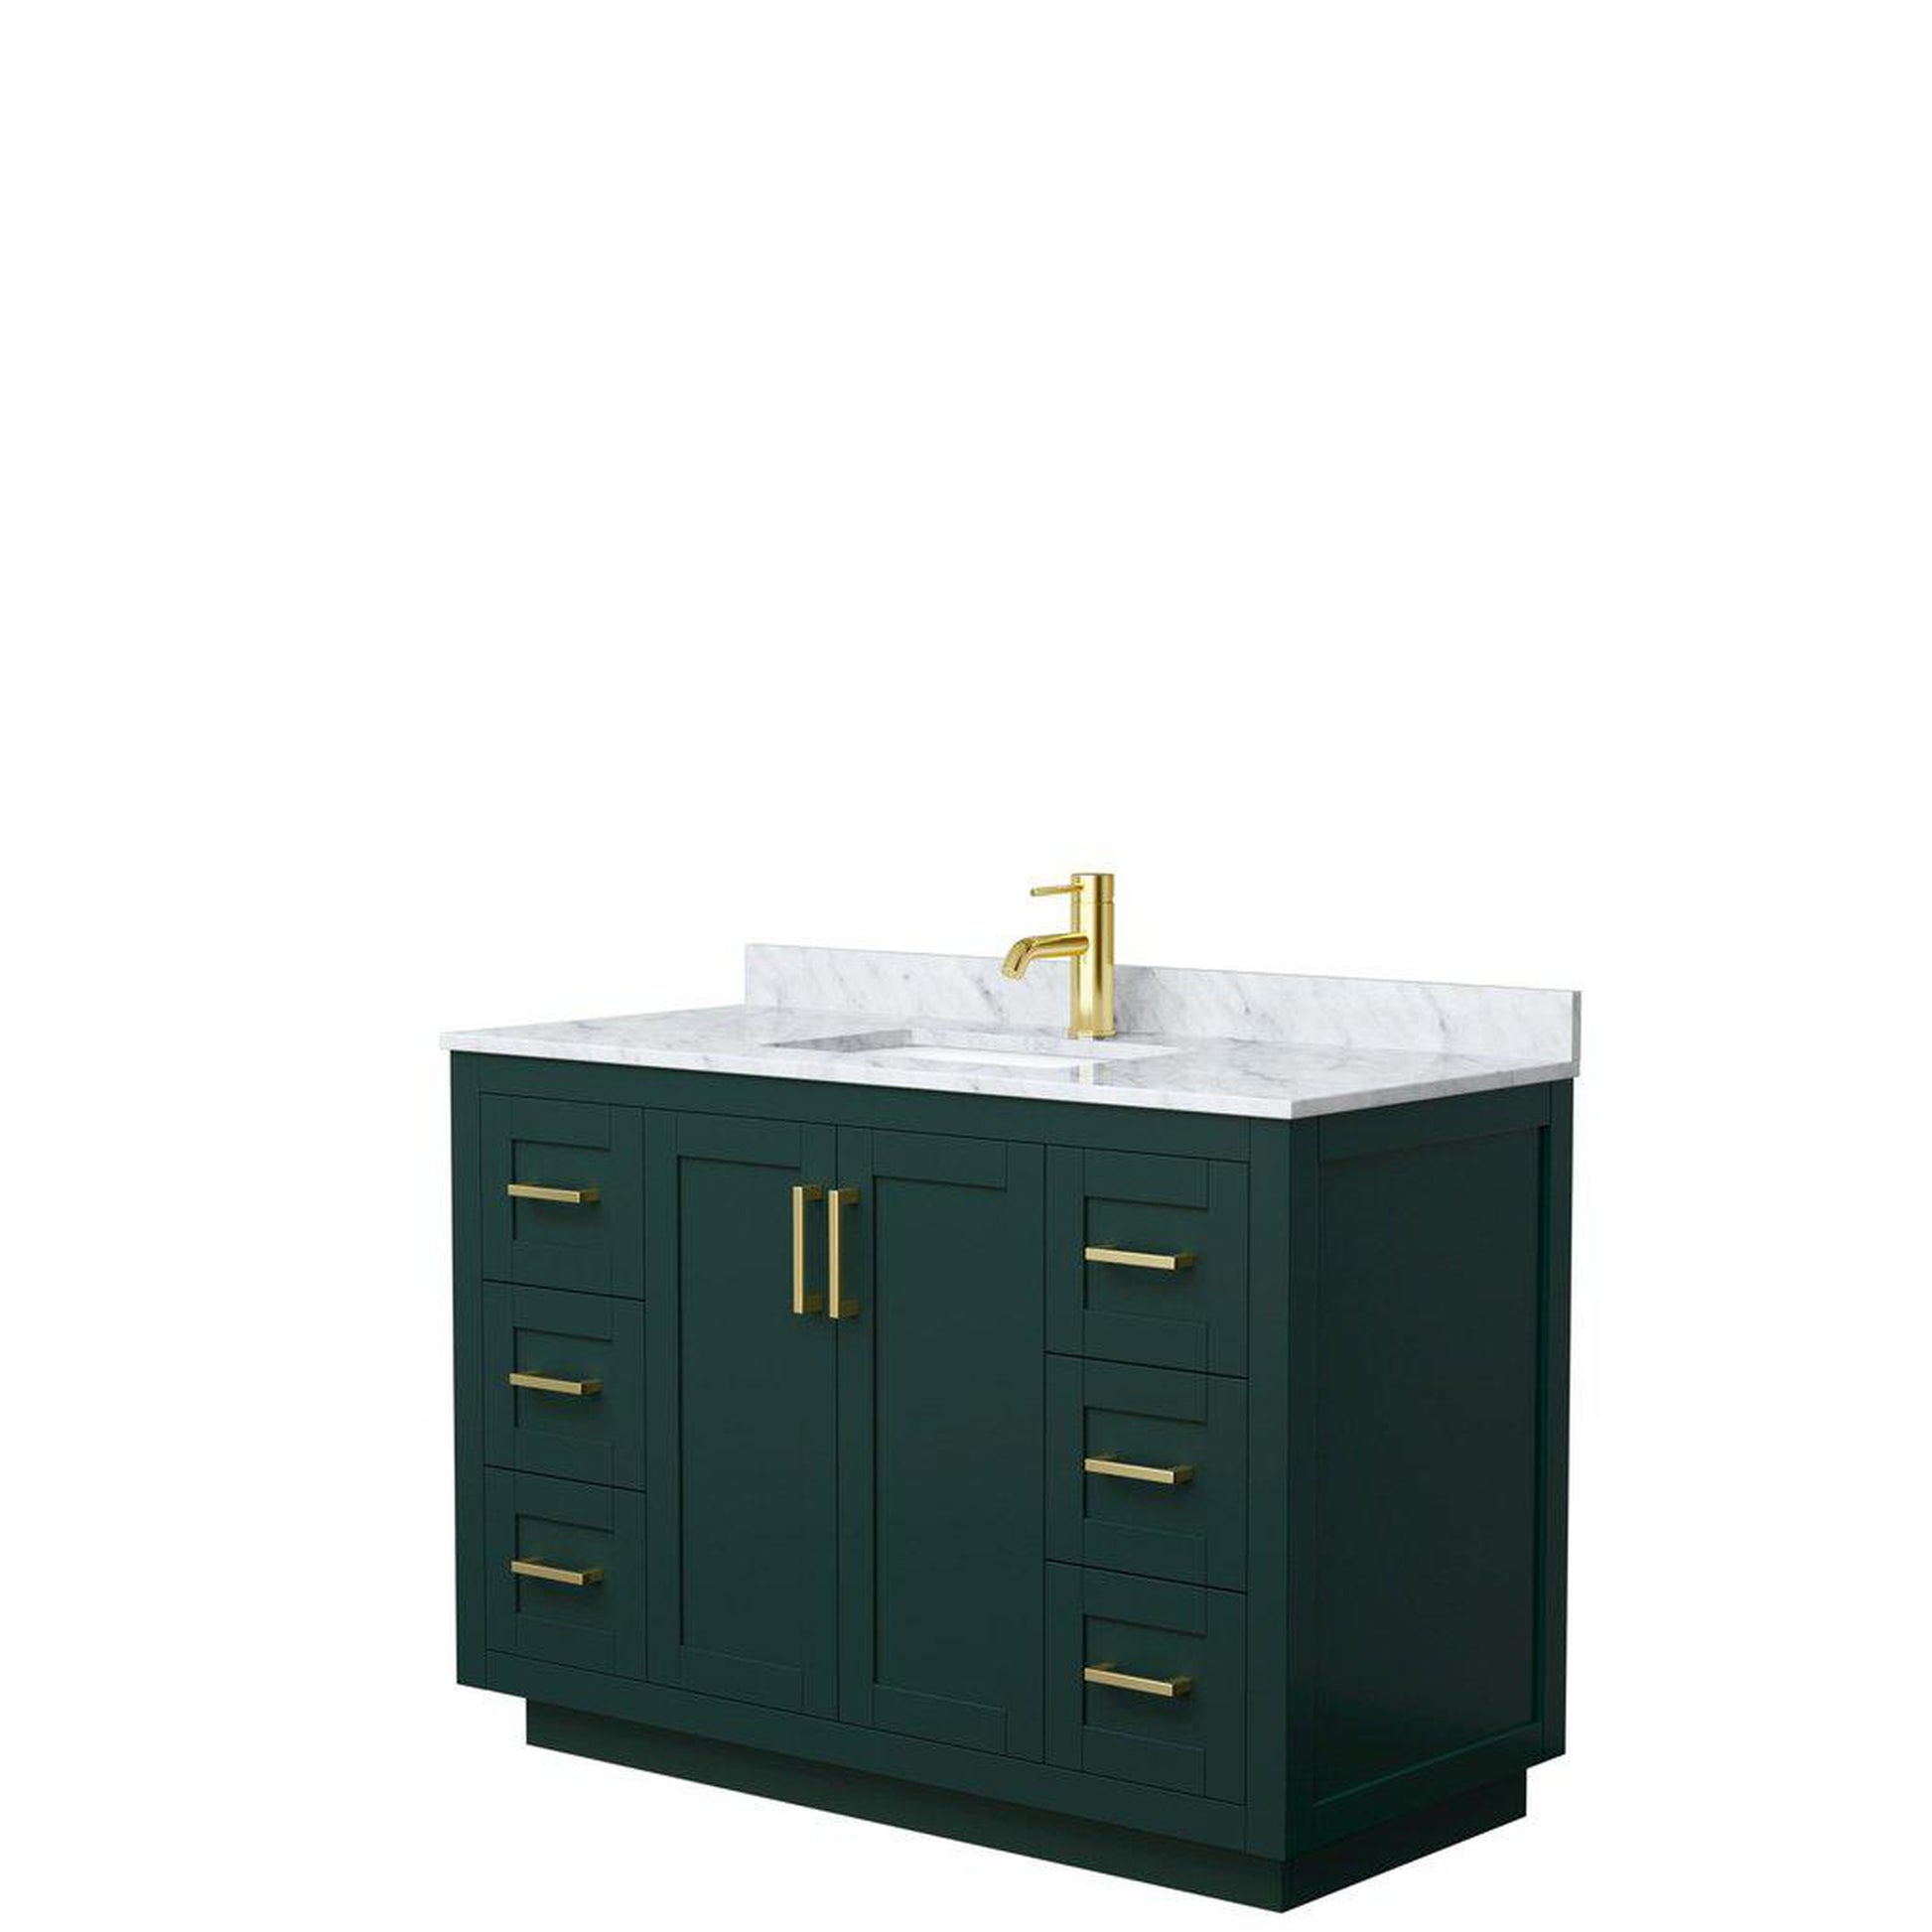 Wyndham Collection Miranda 48" Single Bathroom Green Vanity Set With White Carrara Marble Countertop, Undermount Square Sink, And Brushed Gold Trim